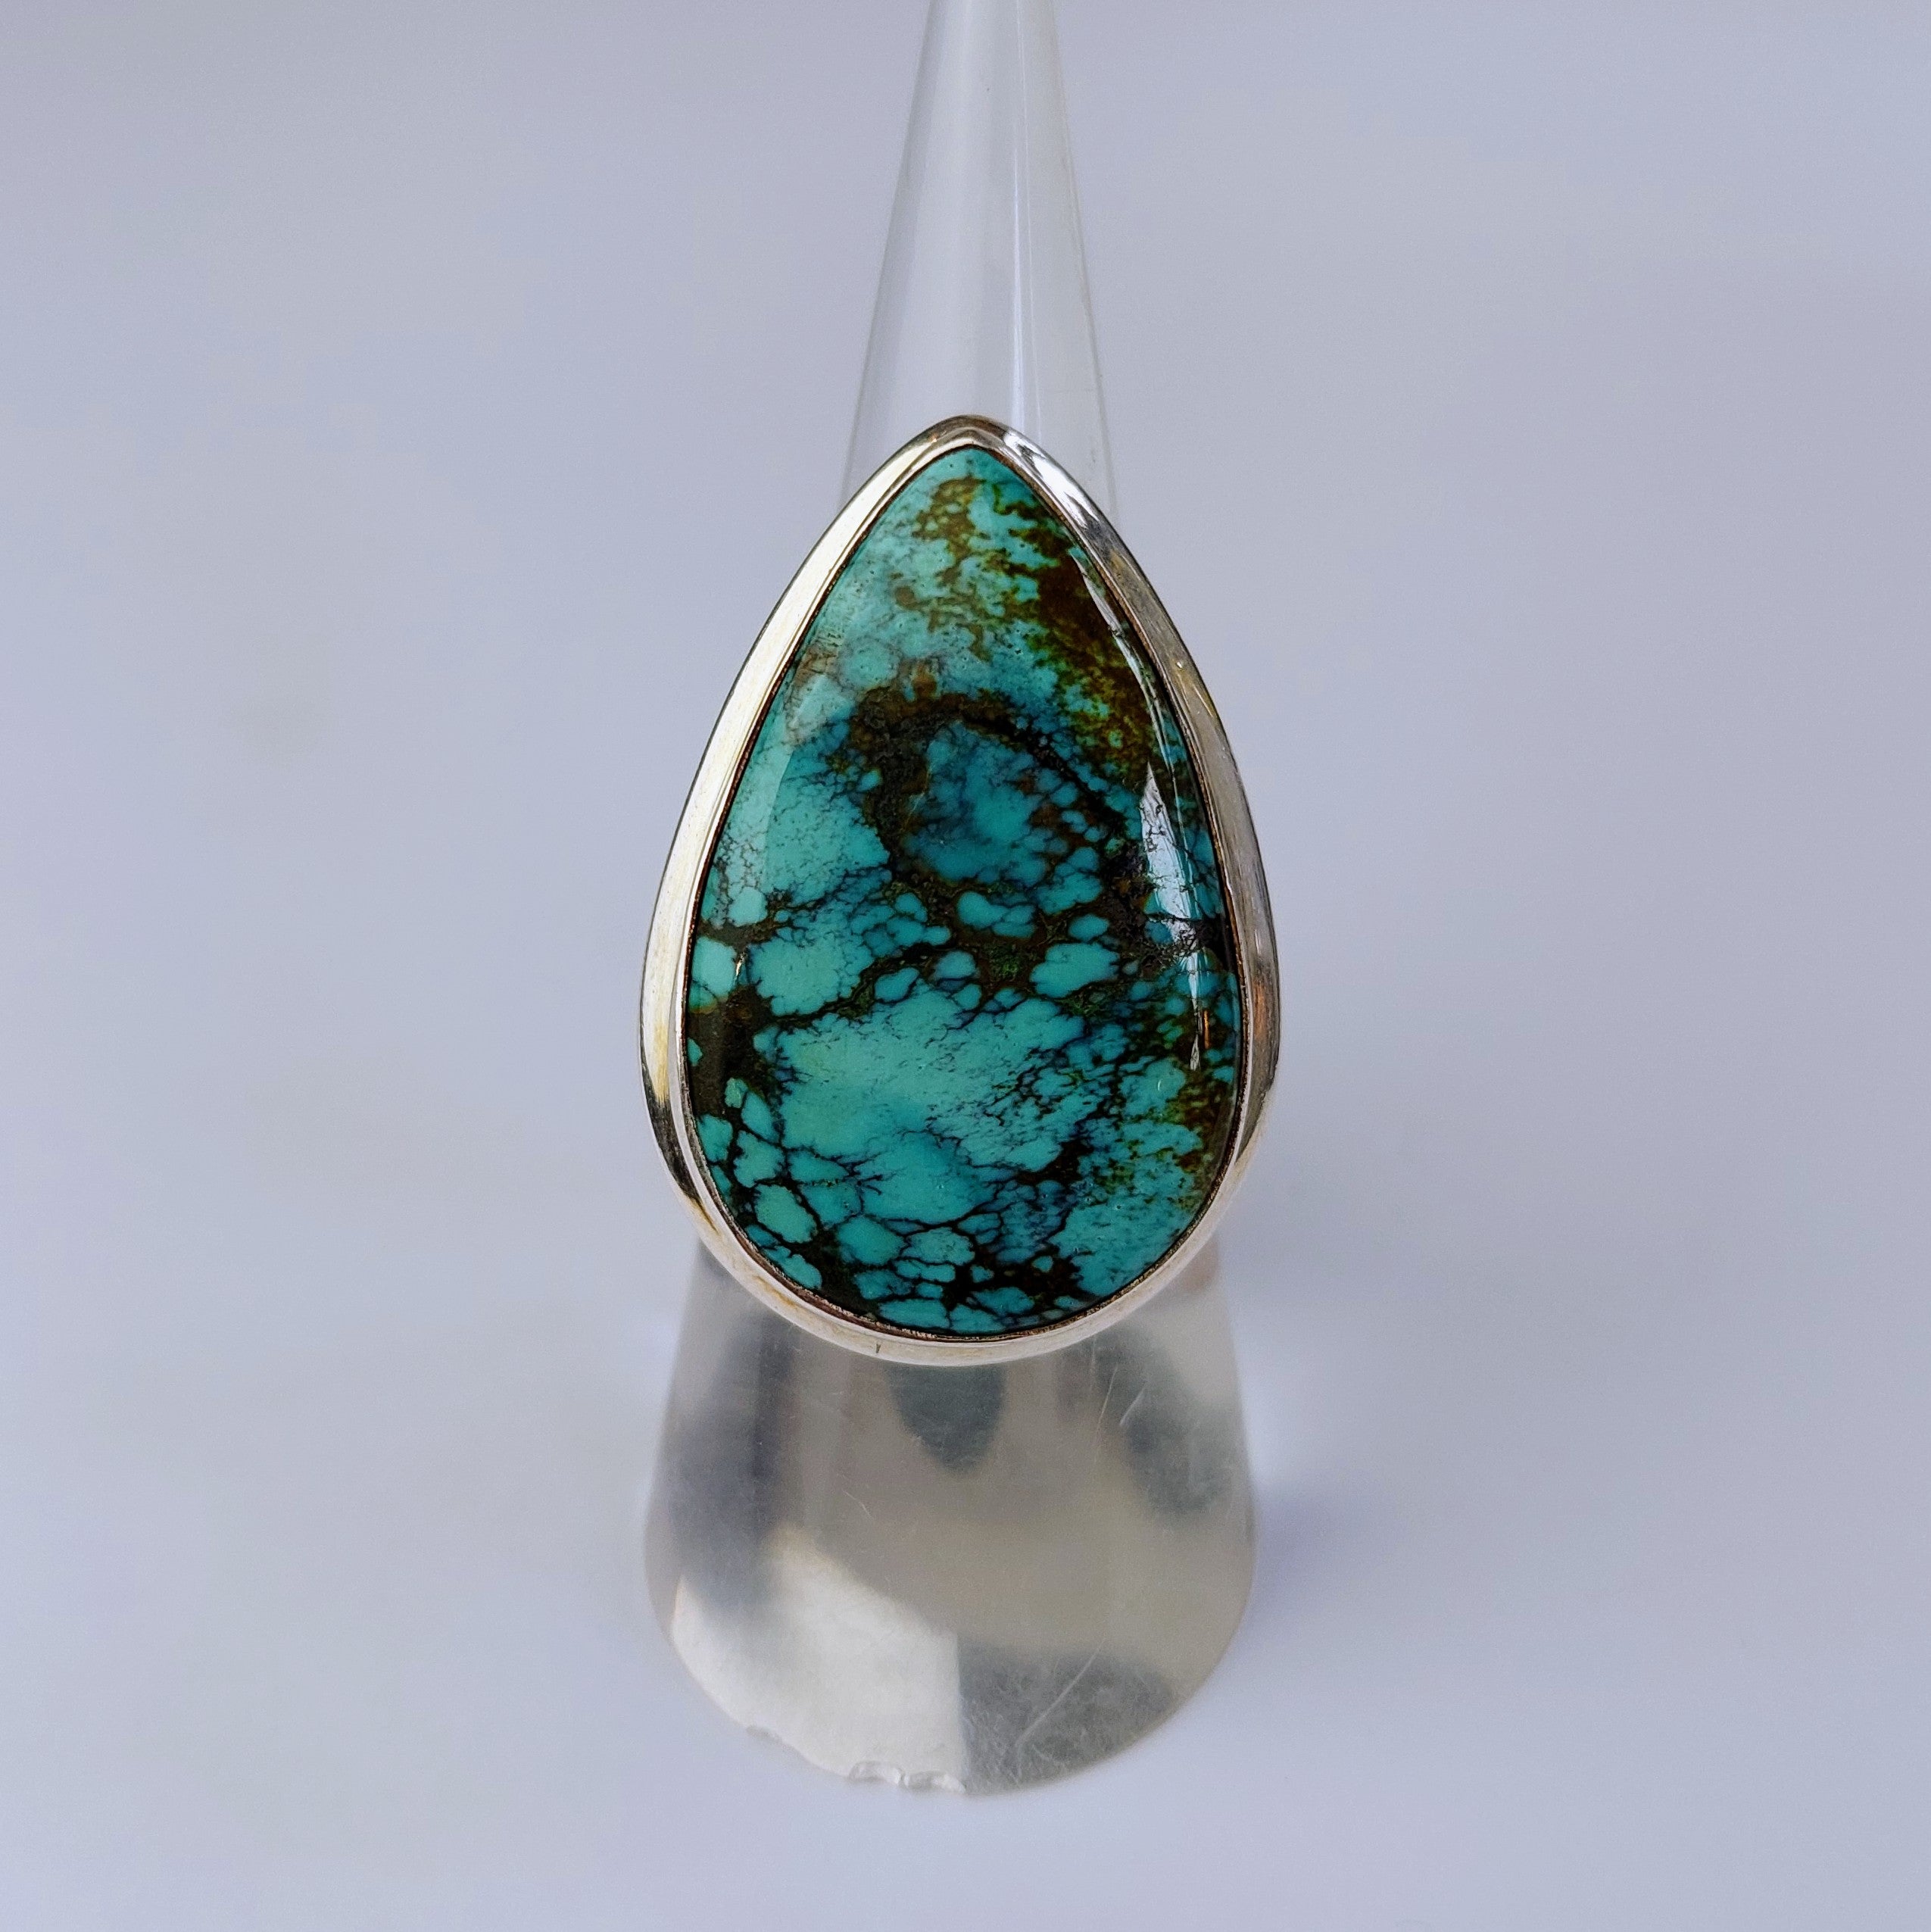 Large Turquoise Ring - The Nancy Smillie Shop - Art, Jewellery & Designer Gifts Glasgow